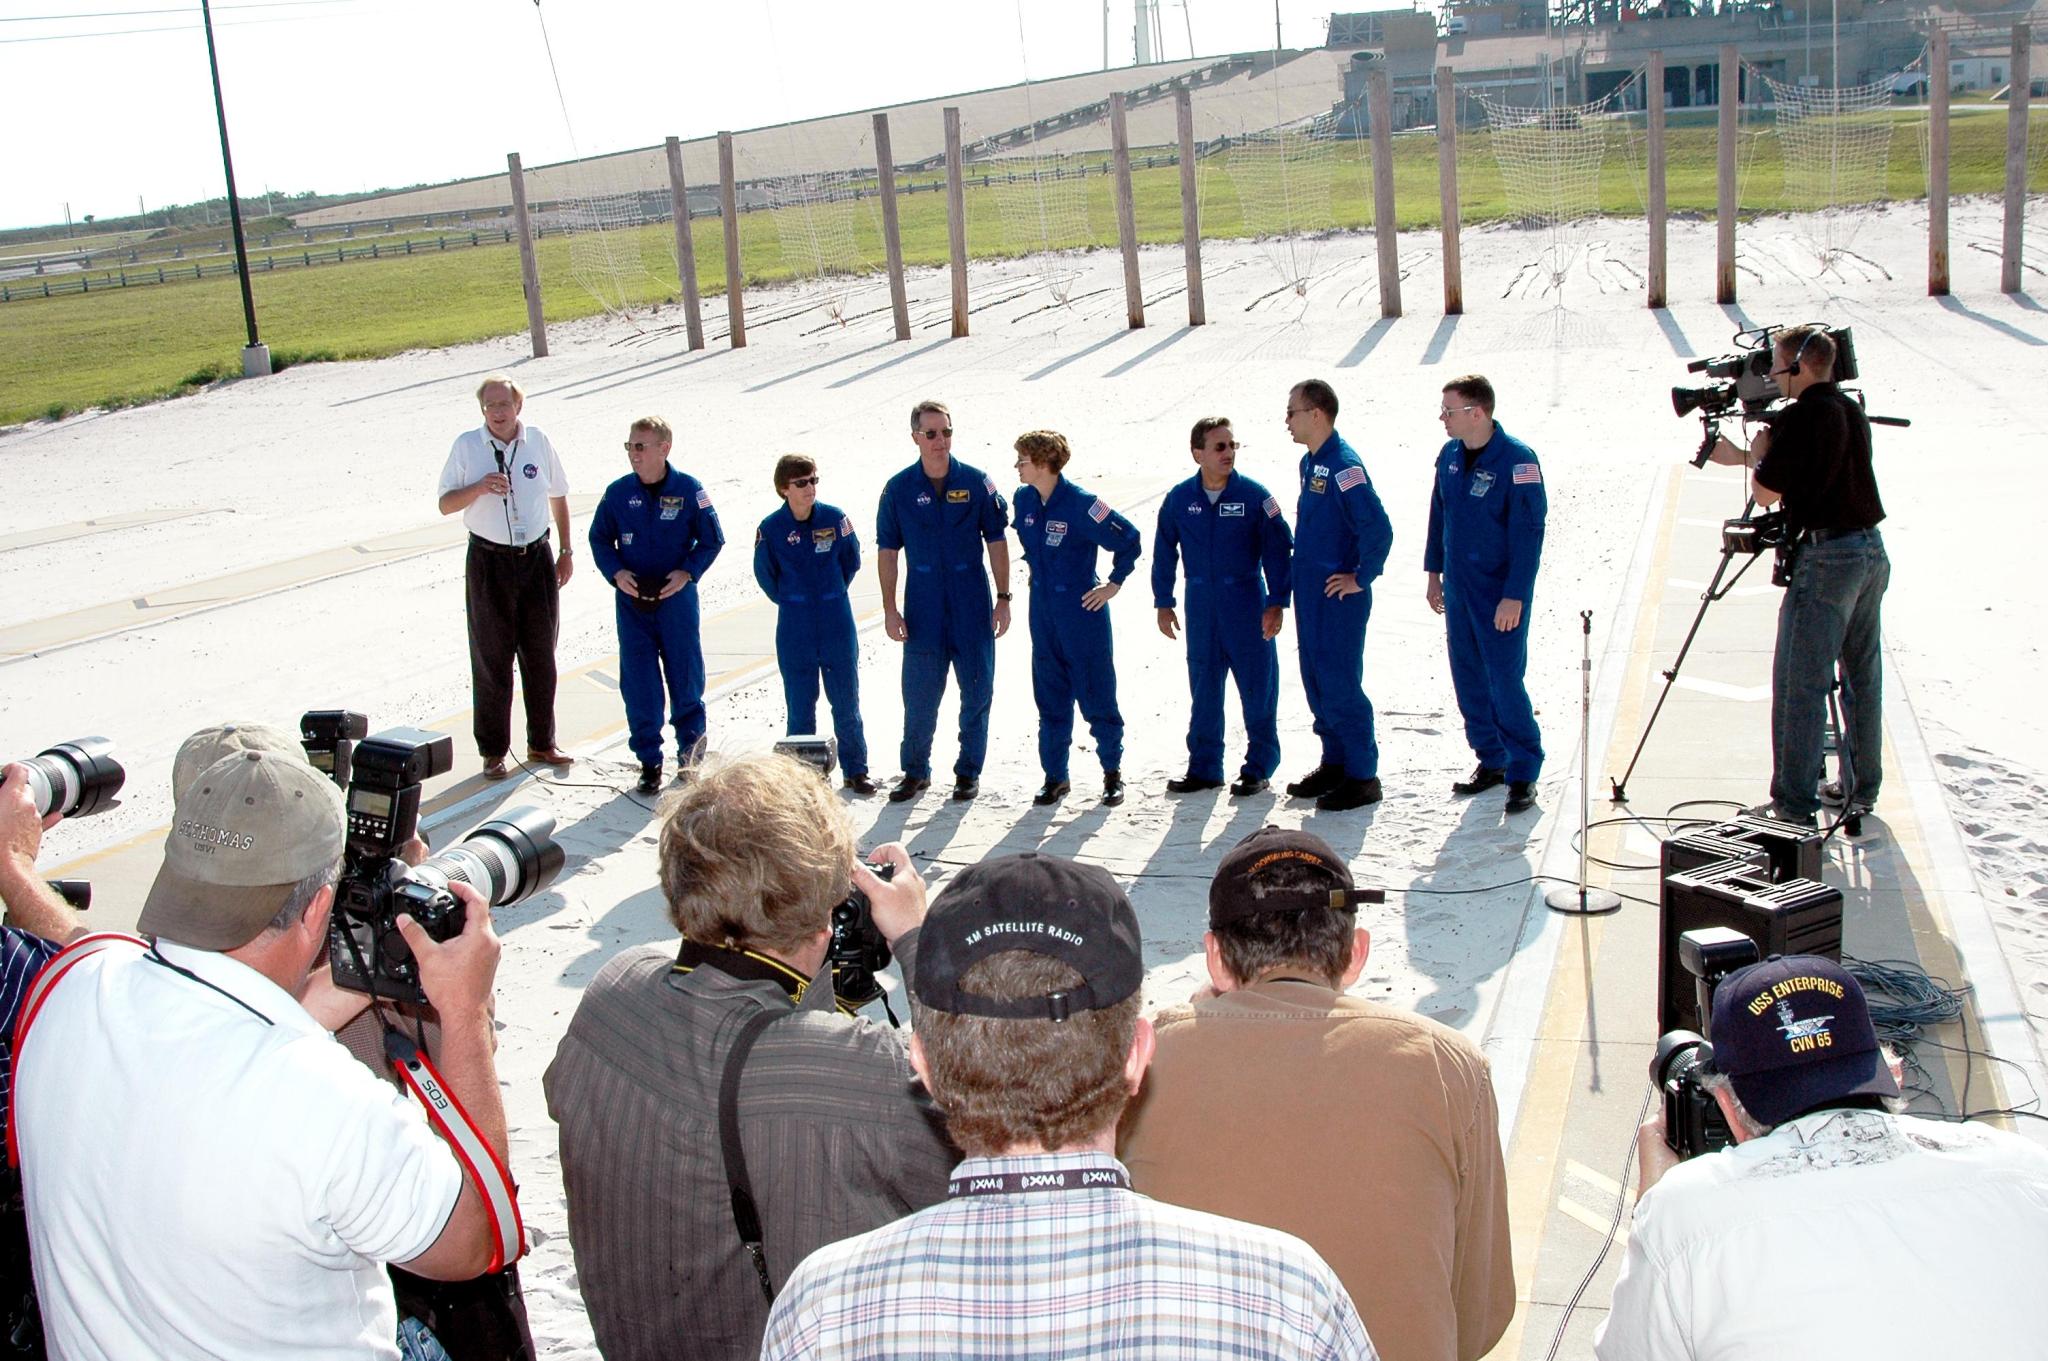 The STS-114 crew gathers for a media question-and-answer session moderated by George Diller, left.